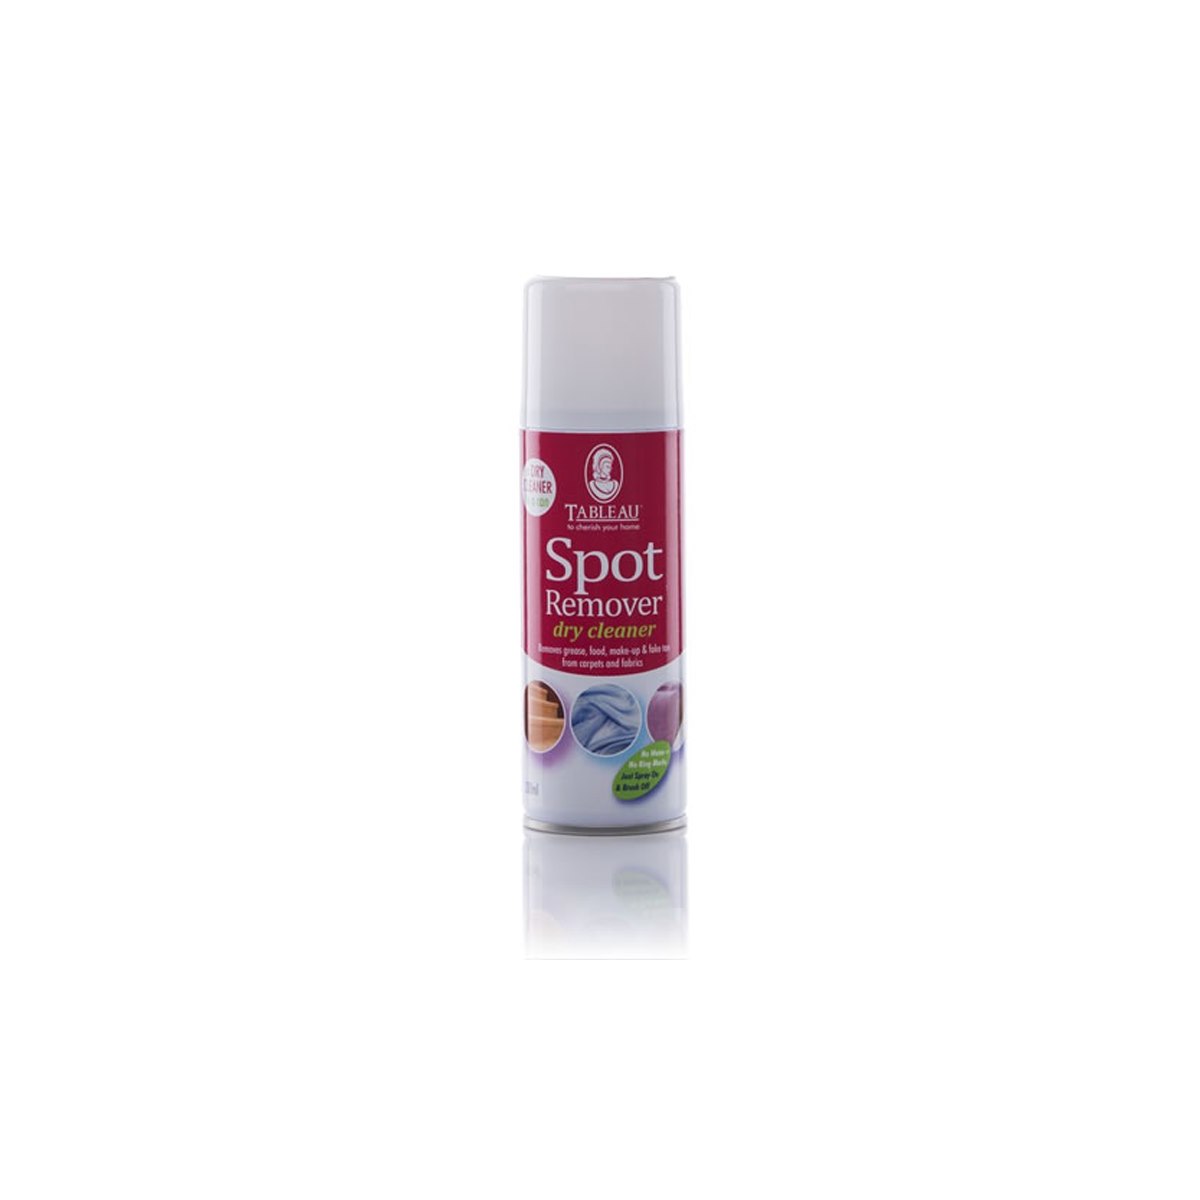 Tableau Spot Remover Dry Cleaner Spray 200ml